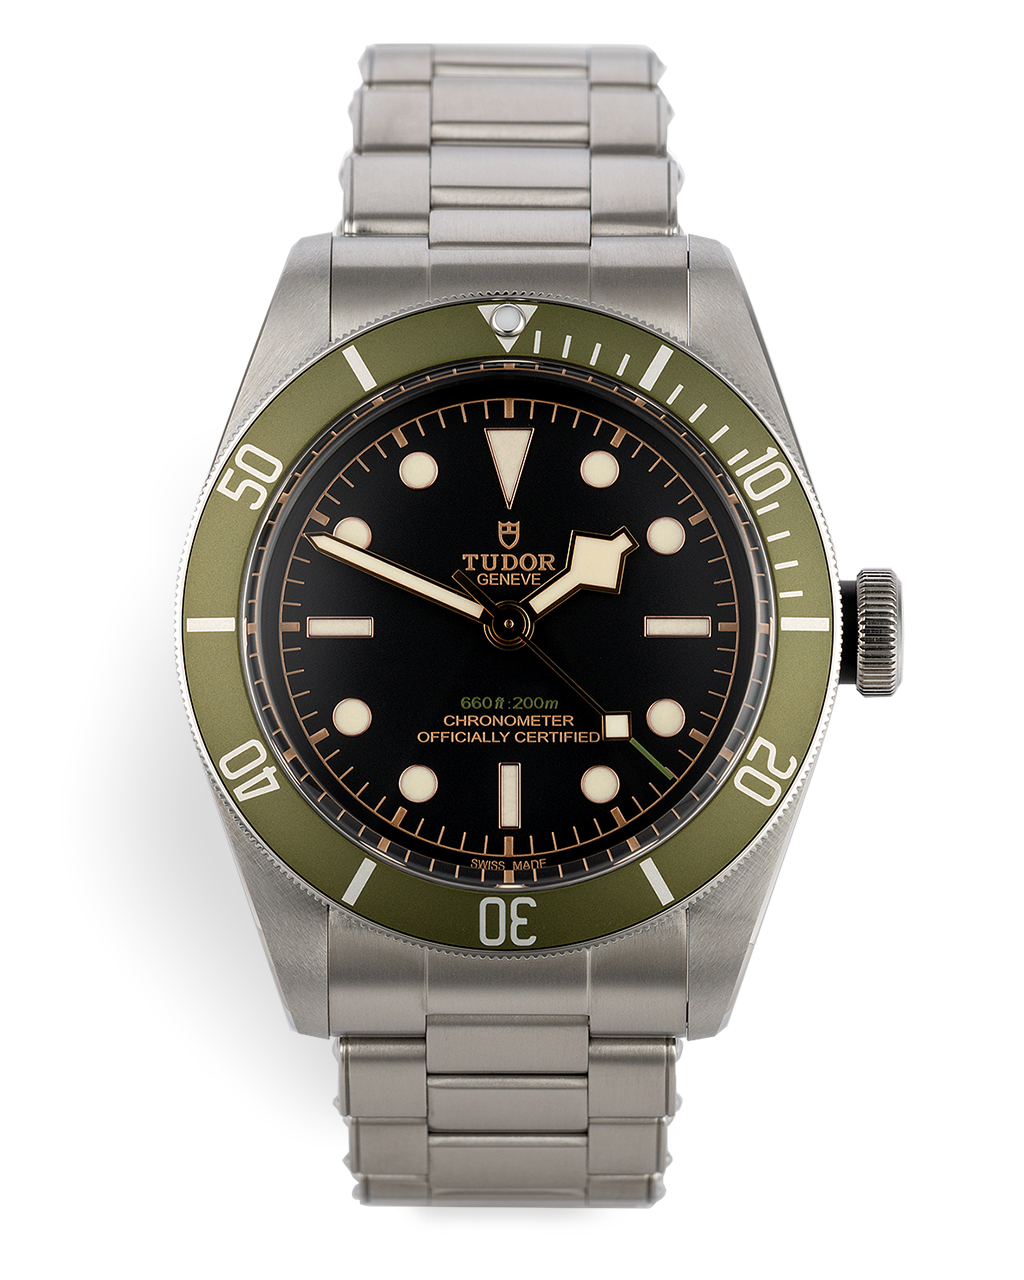 Tudor Black Bay Watches | ref 79230G | Special Edition | The Watch Club